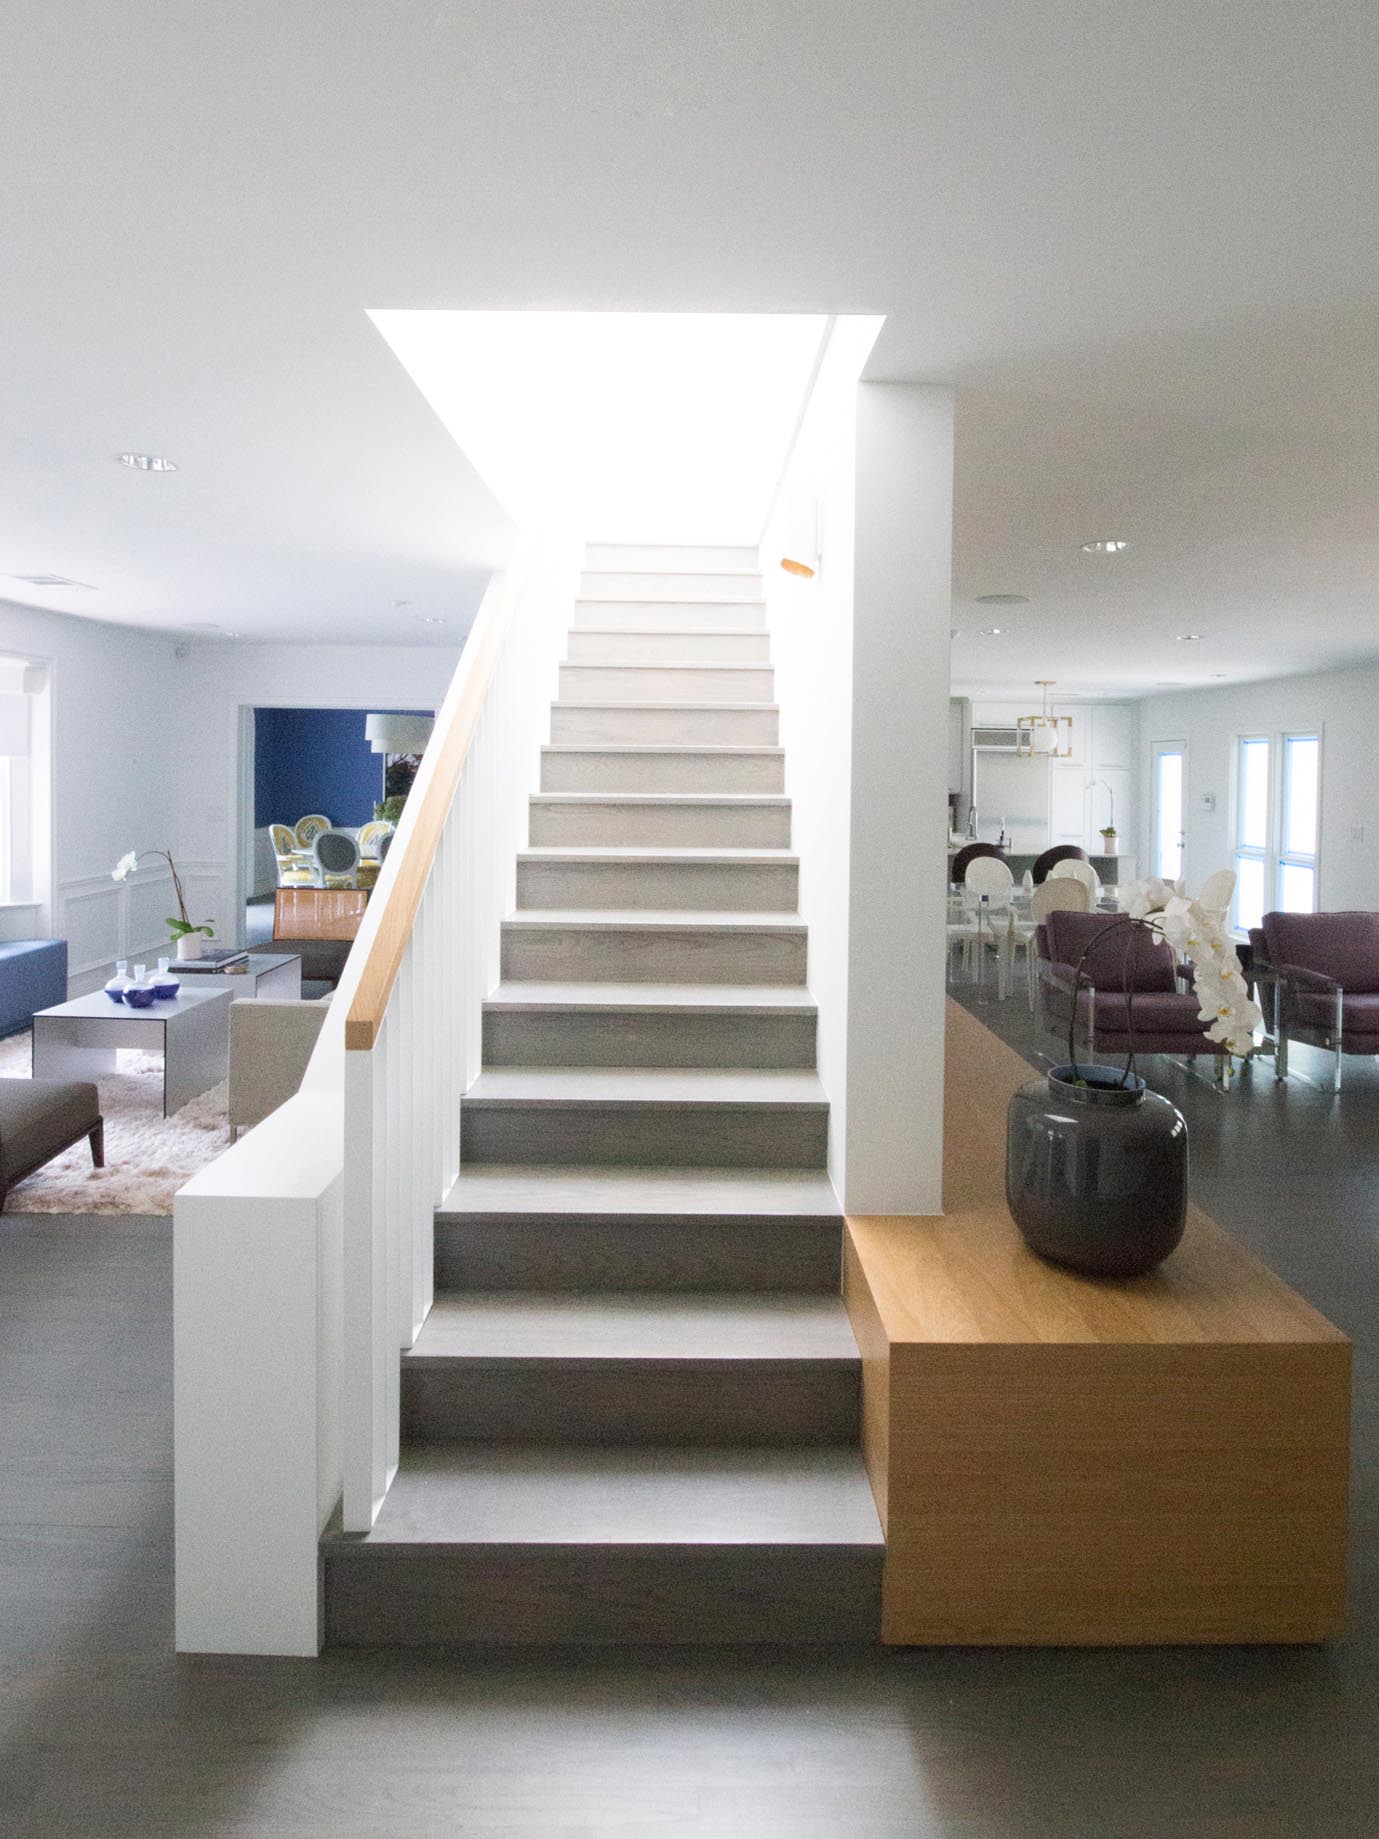 Centrally located stairs that separate different living areas.